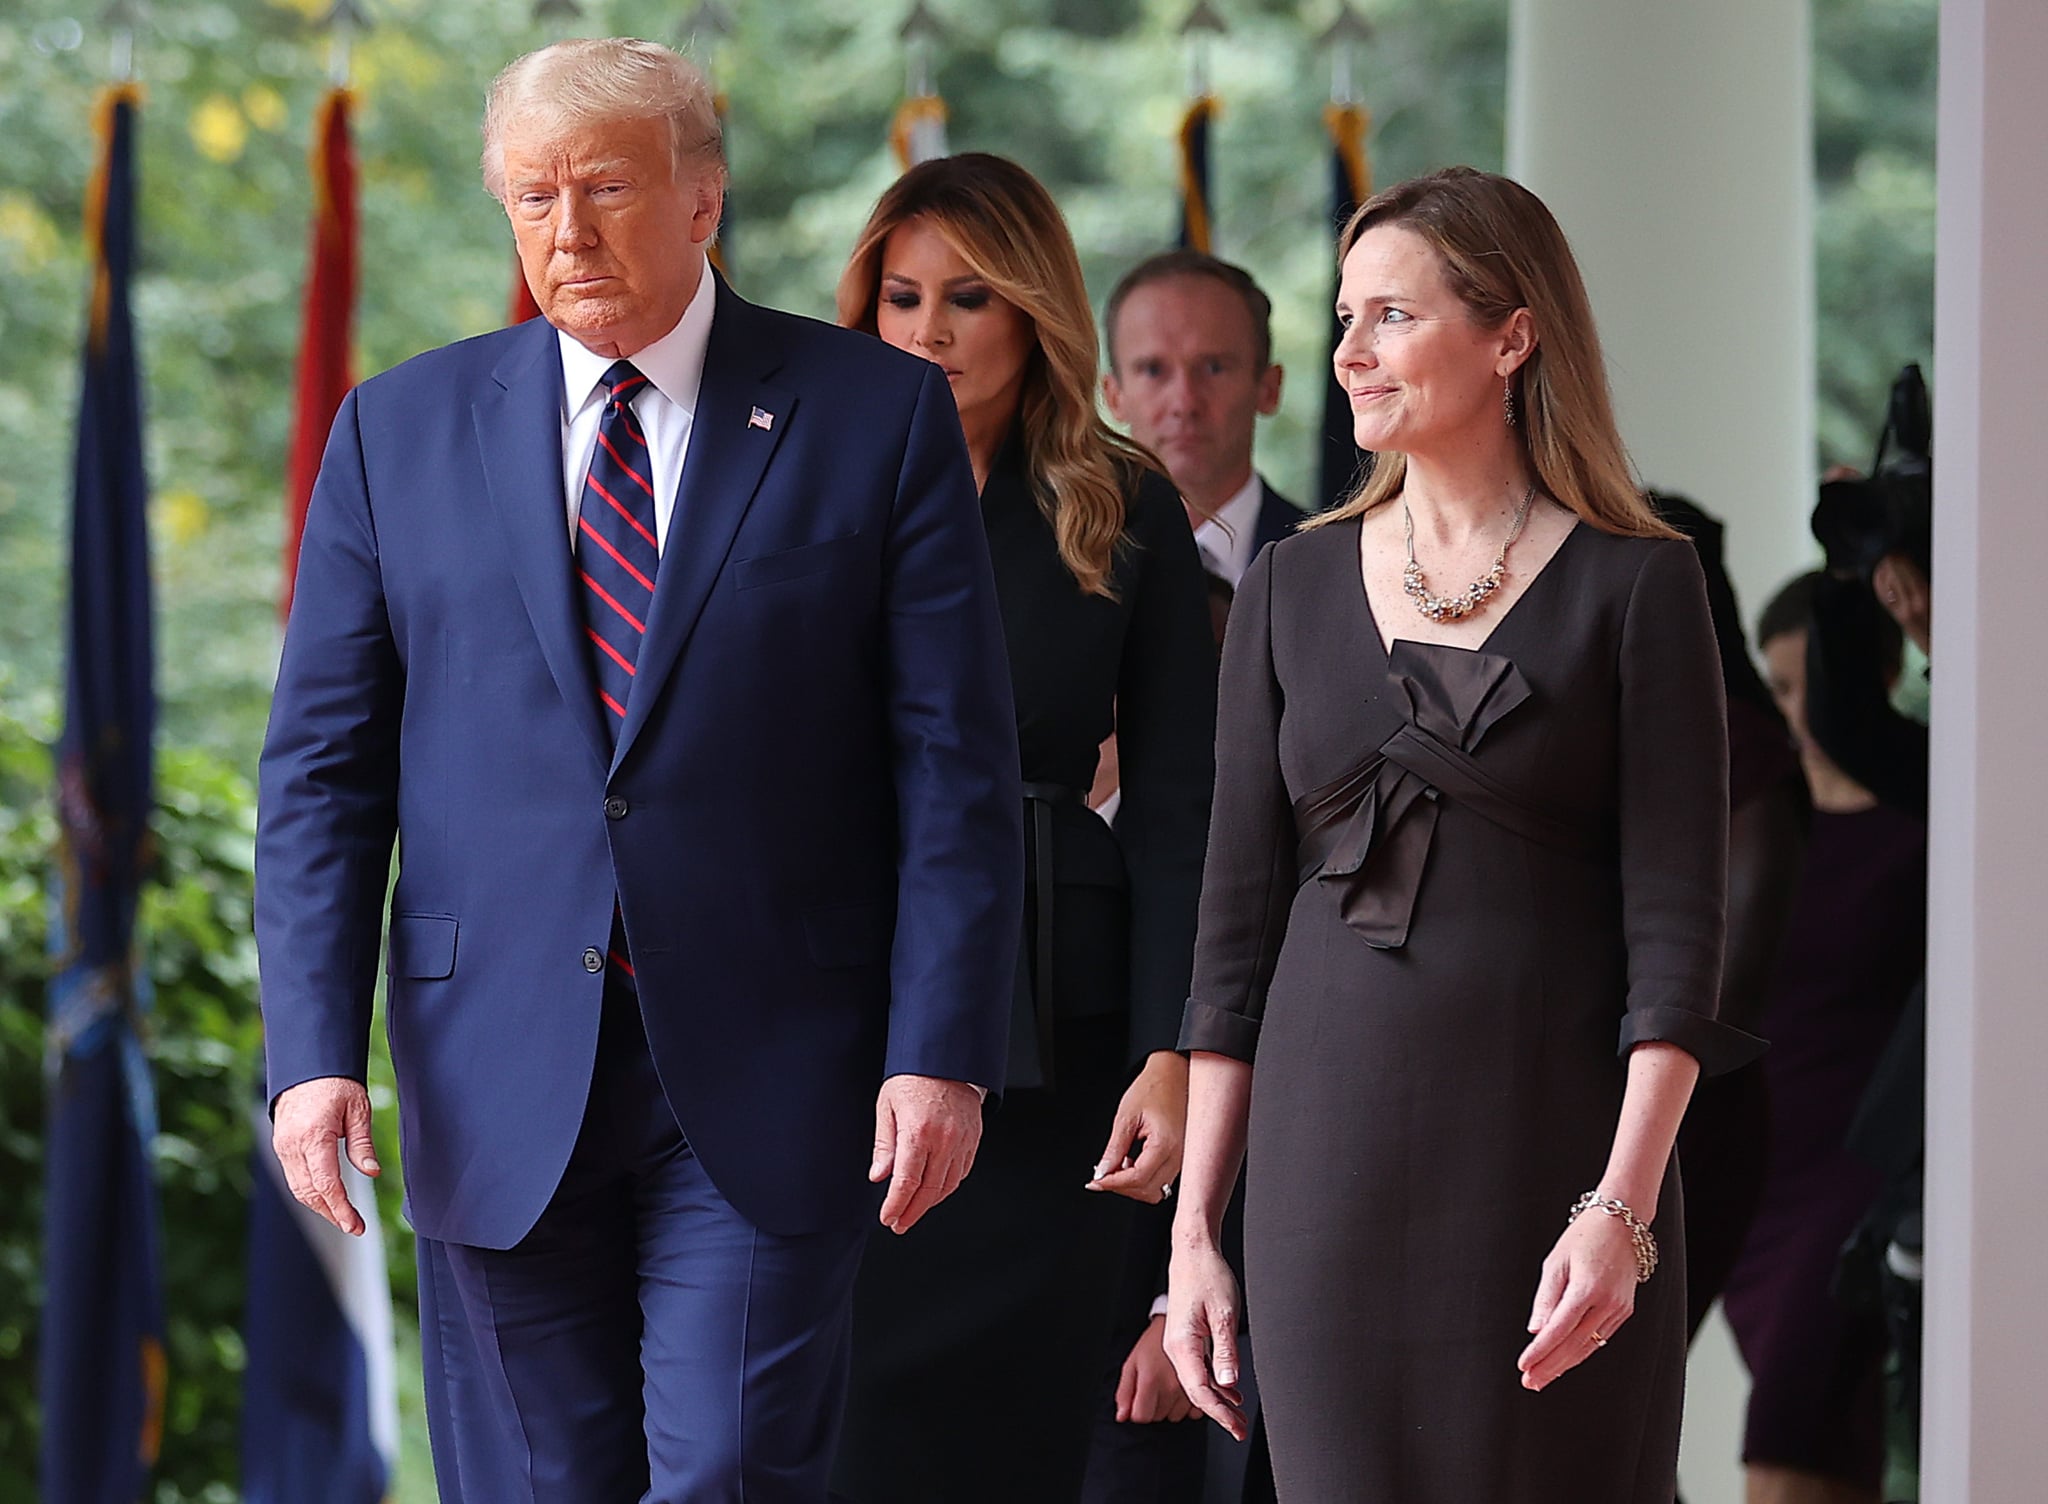 WASHINGTON, DC - SEPTEMBER 26: U.S. President Donald Trump (L) arrives to introduce 7th U.S. Circuit Court Judge Amy Coney Barrett as his nominee to the Supreme Court in the Rose Garden at the White House September 26, 2020 in Washington, DC. With 38 days until the election, Trump tapped Barrett to be his third Supreme Court nominee in just four years and to replace the late Associate Justice Ruth Bader Ginsburg, who will be buried at Arlington National Cemetery on Tuesday. (Photo by Chip Somodevilla/Getty Images)